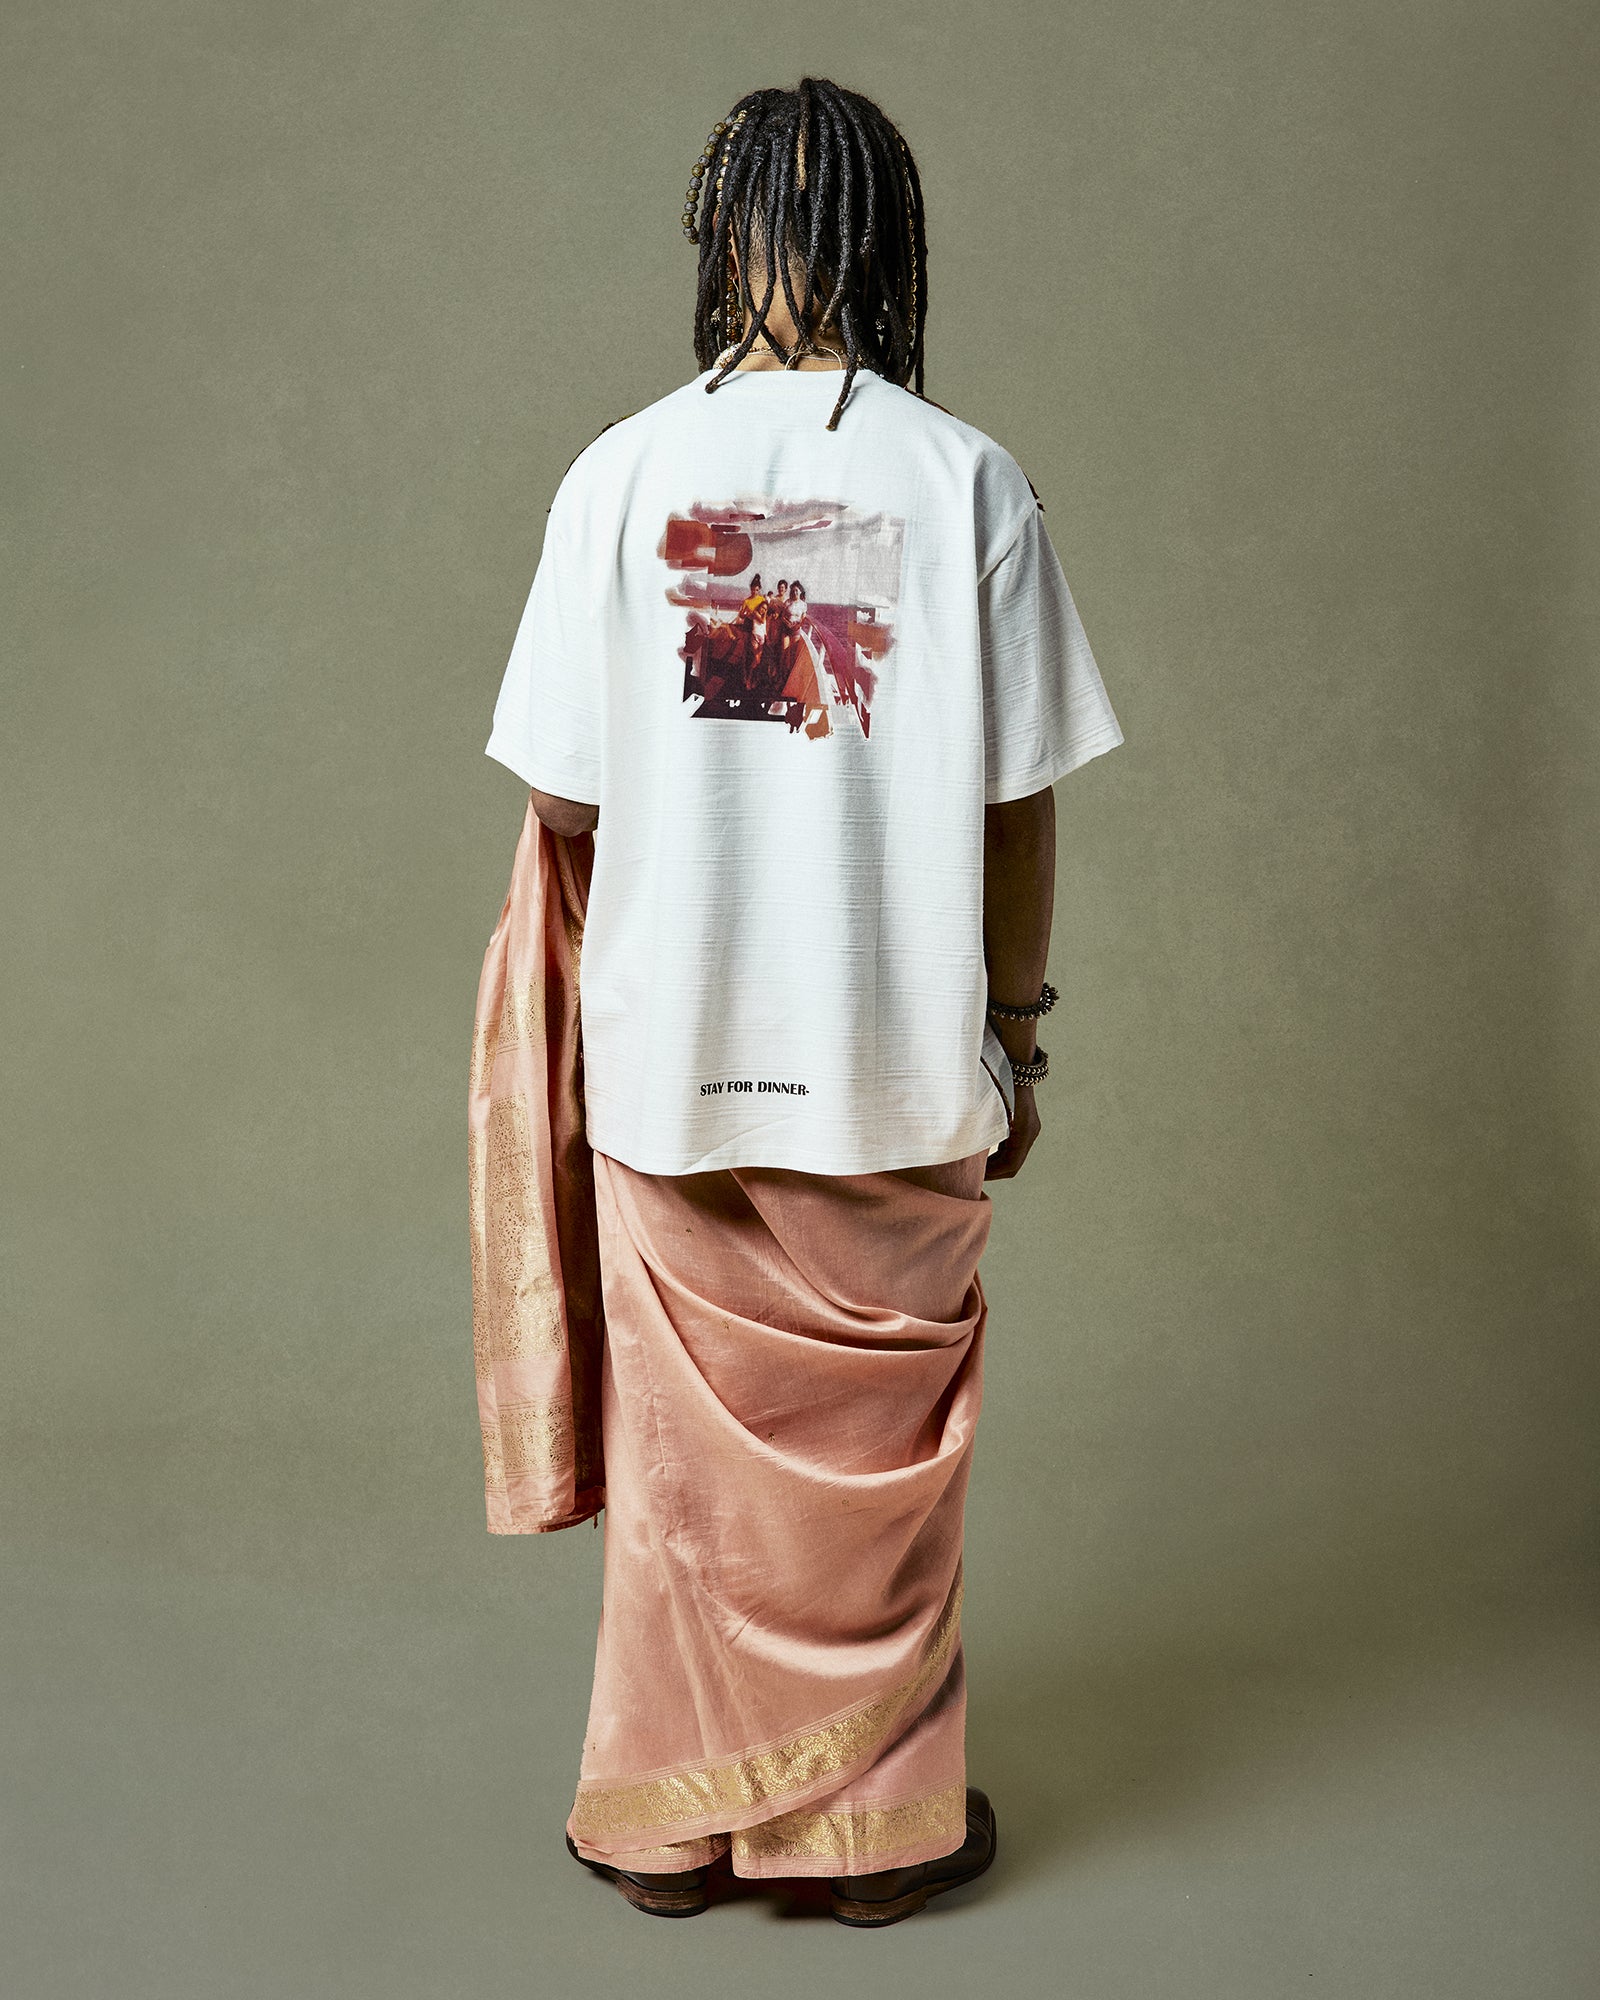 Unique Quinto T-Shirt featuring full-width slub yarn jersey with sari trimmings, and a retro 1960s polaroid print on the back - marrying old-world charm and new-age fashion.